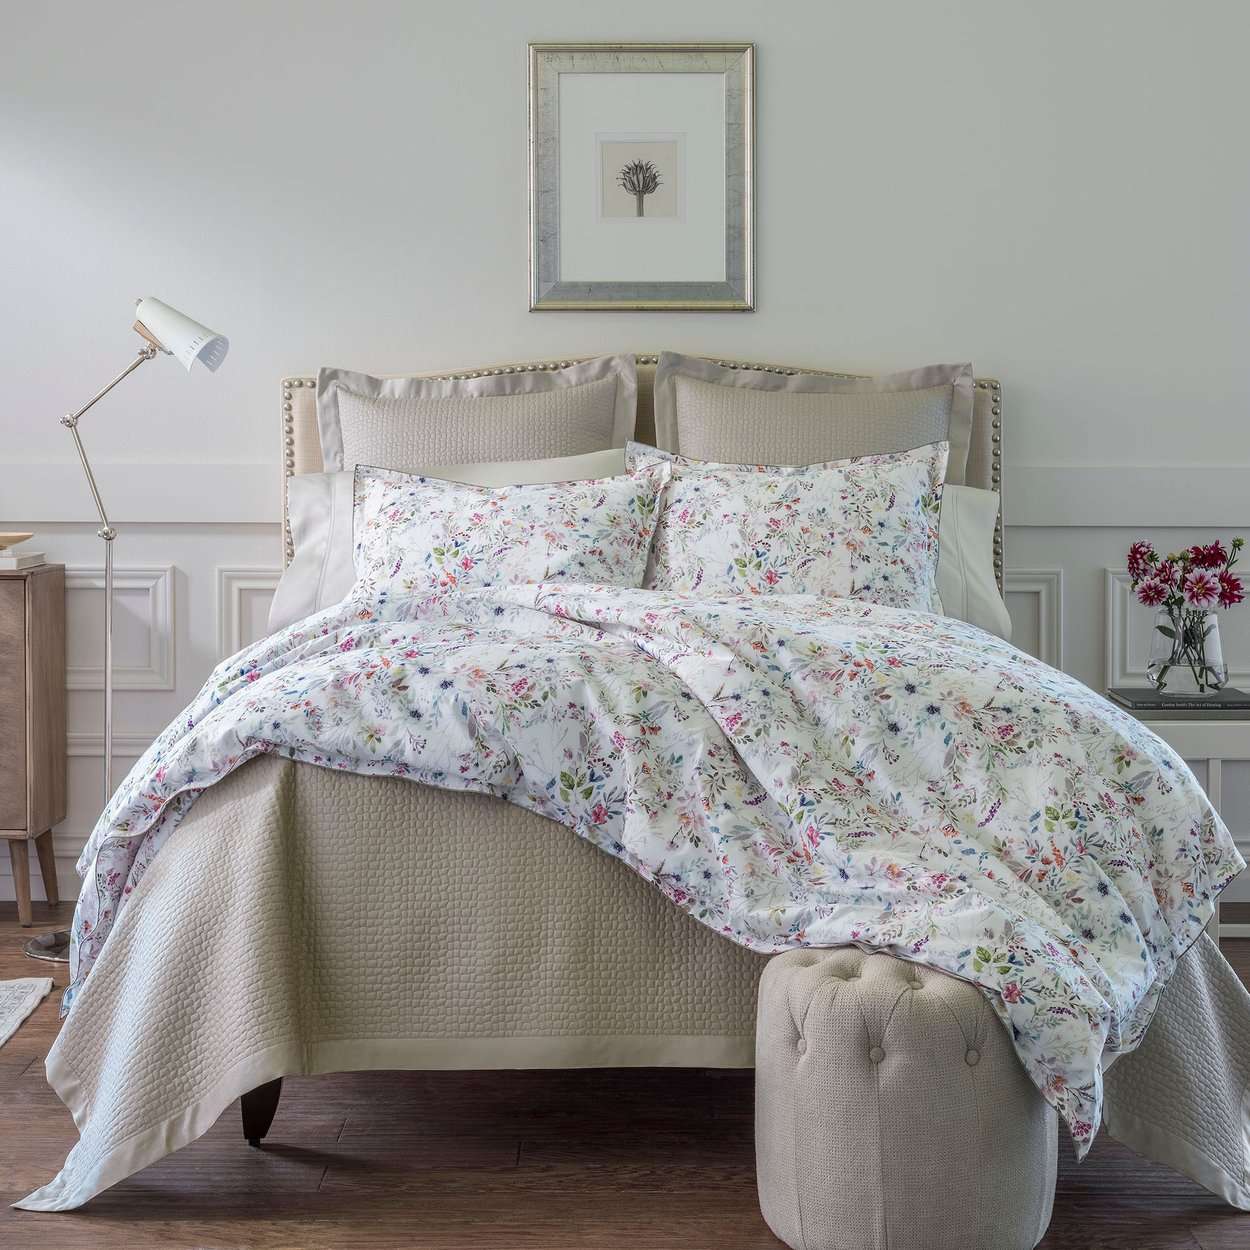 Chloe Floral Percale by Peacock Alley